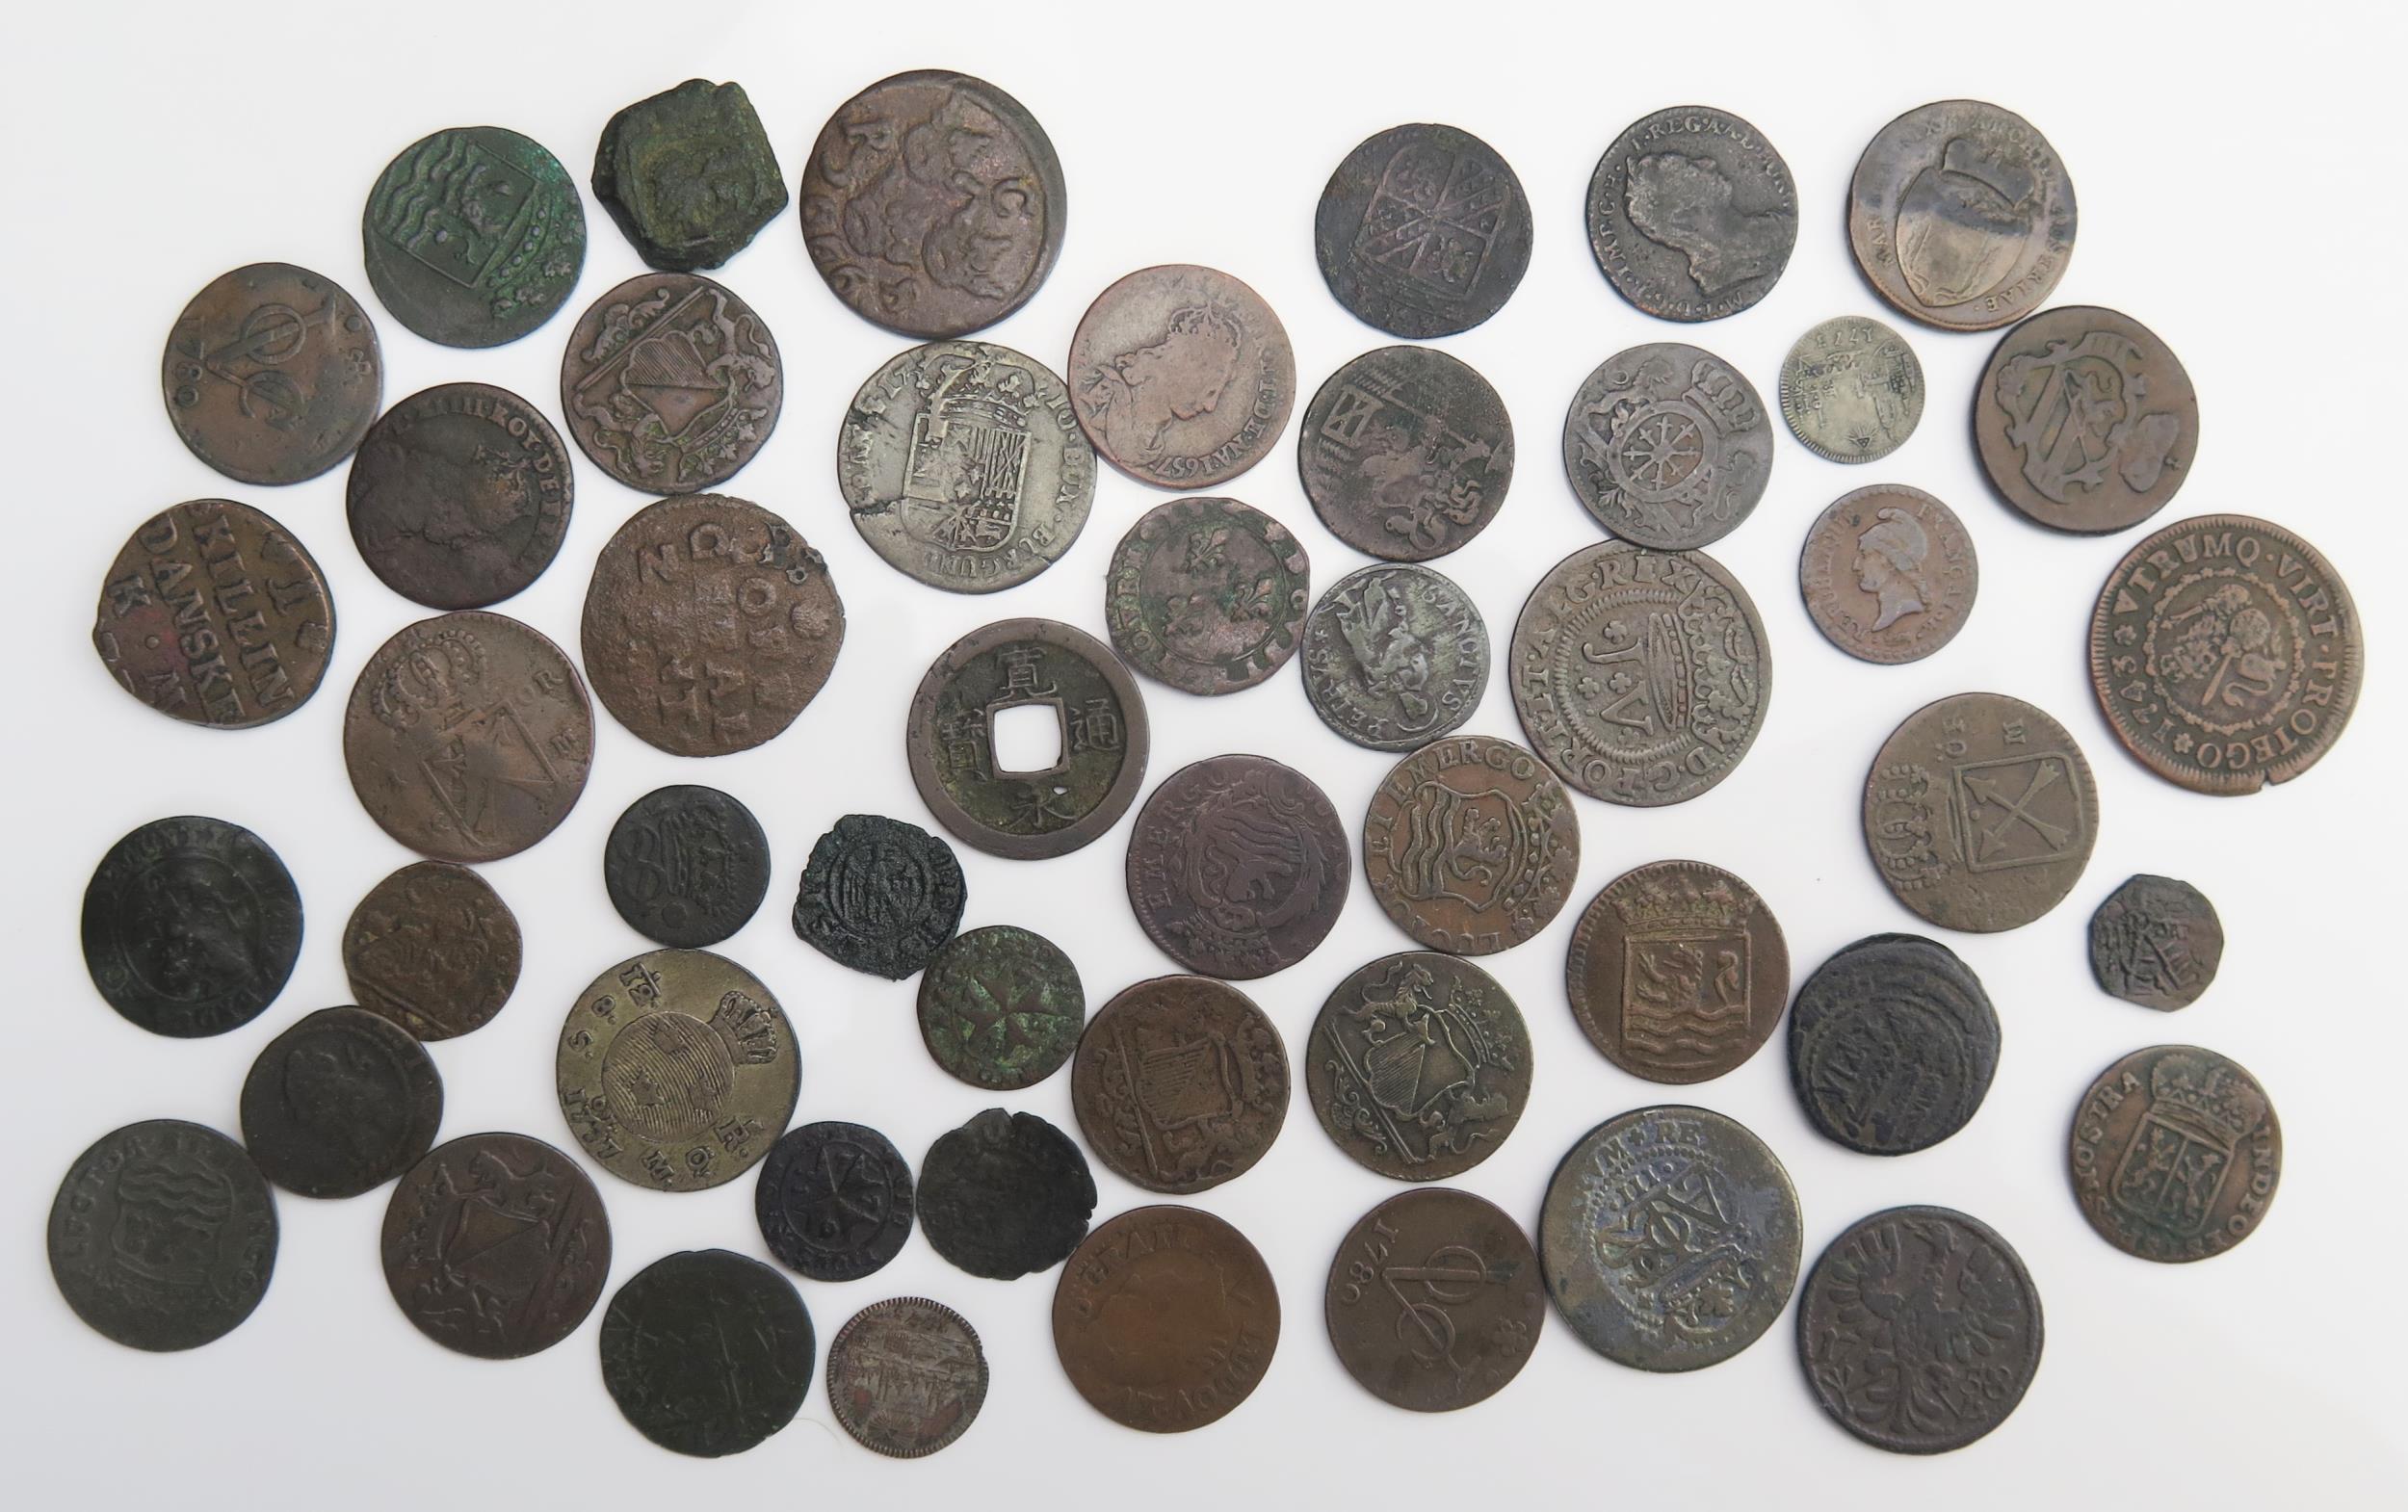 Sheet of mainly 18th century European copper coins including Portugal, Netherlands, France etc.